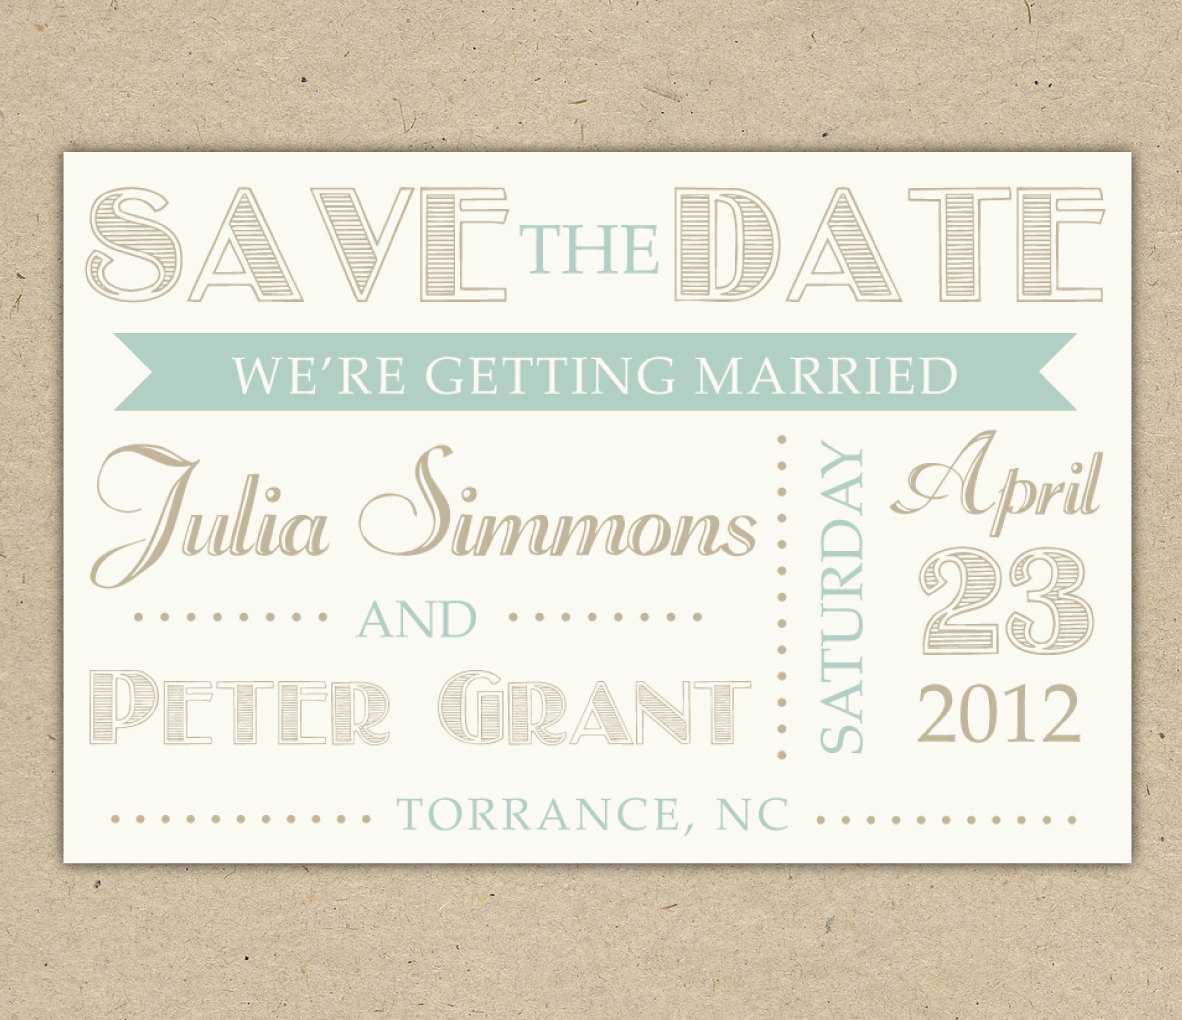 Save The Date Cards Templates For Weddings Within Save The Date Cards Templates